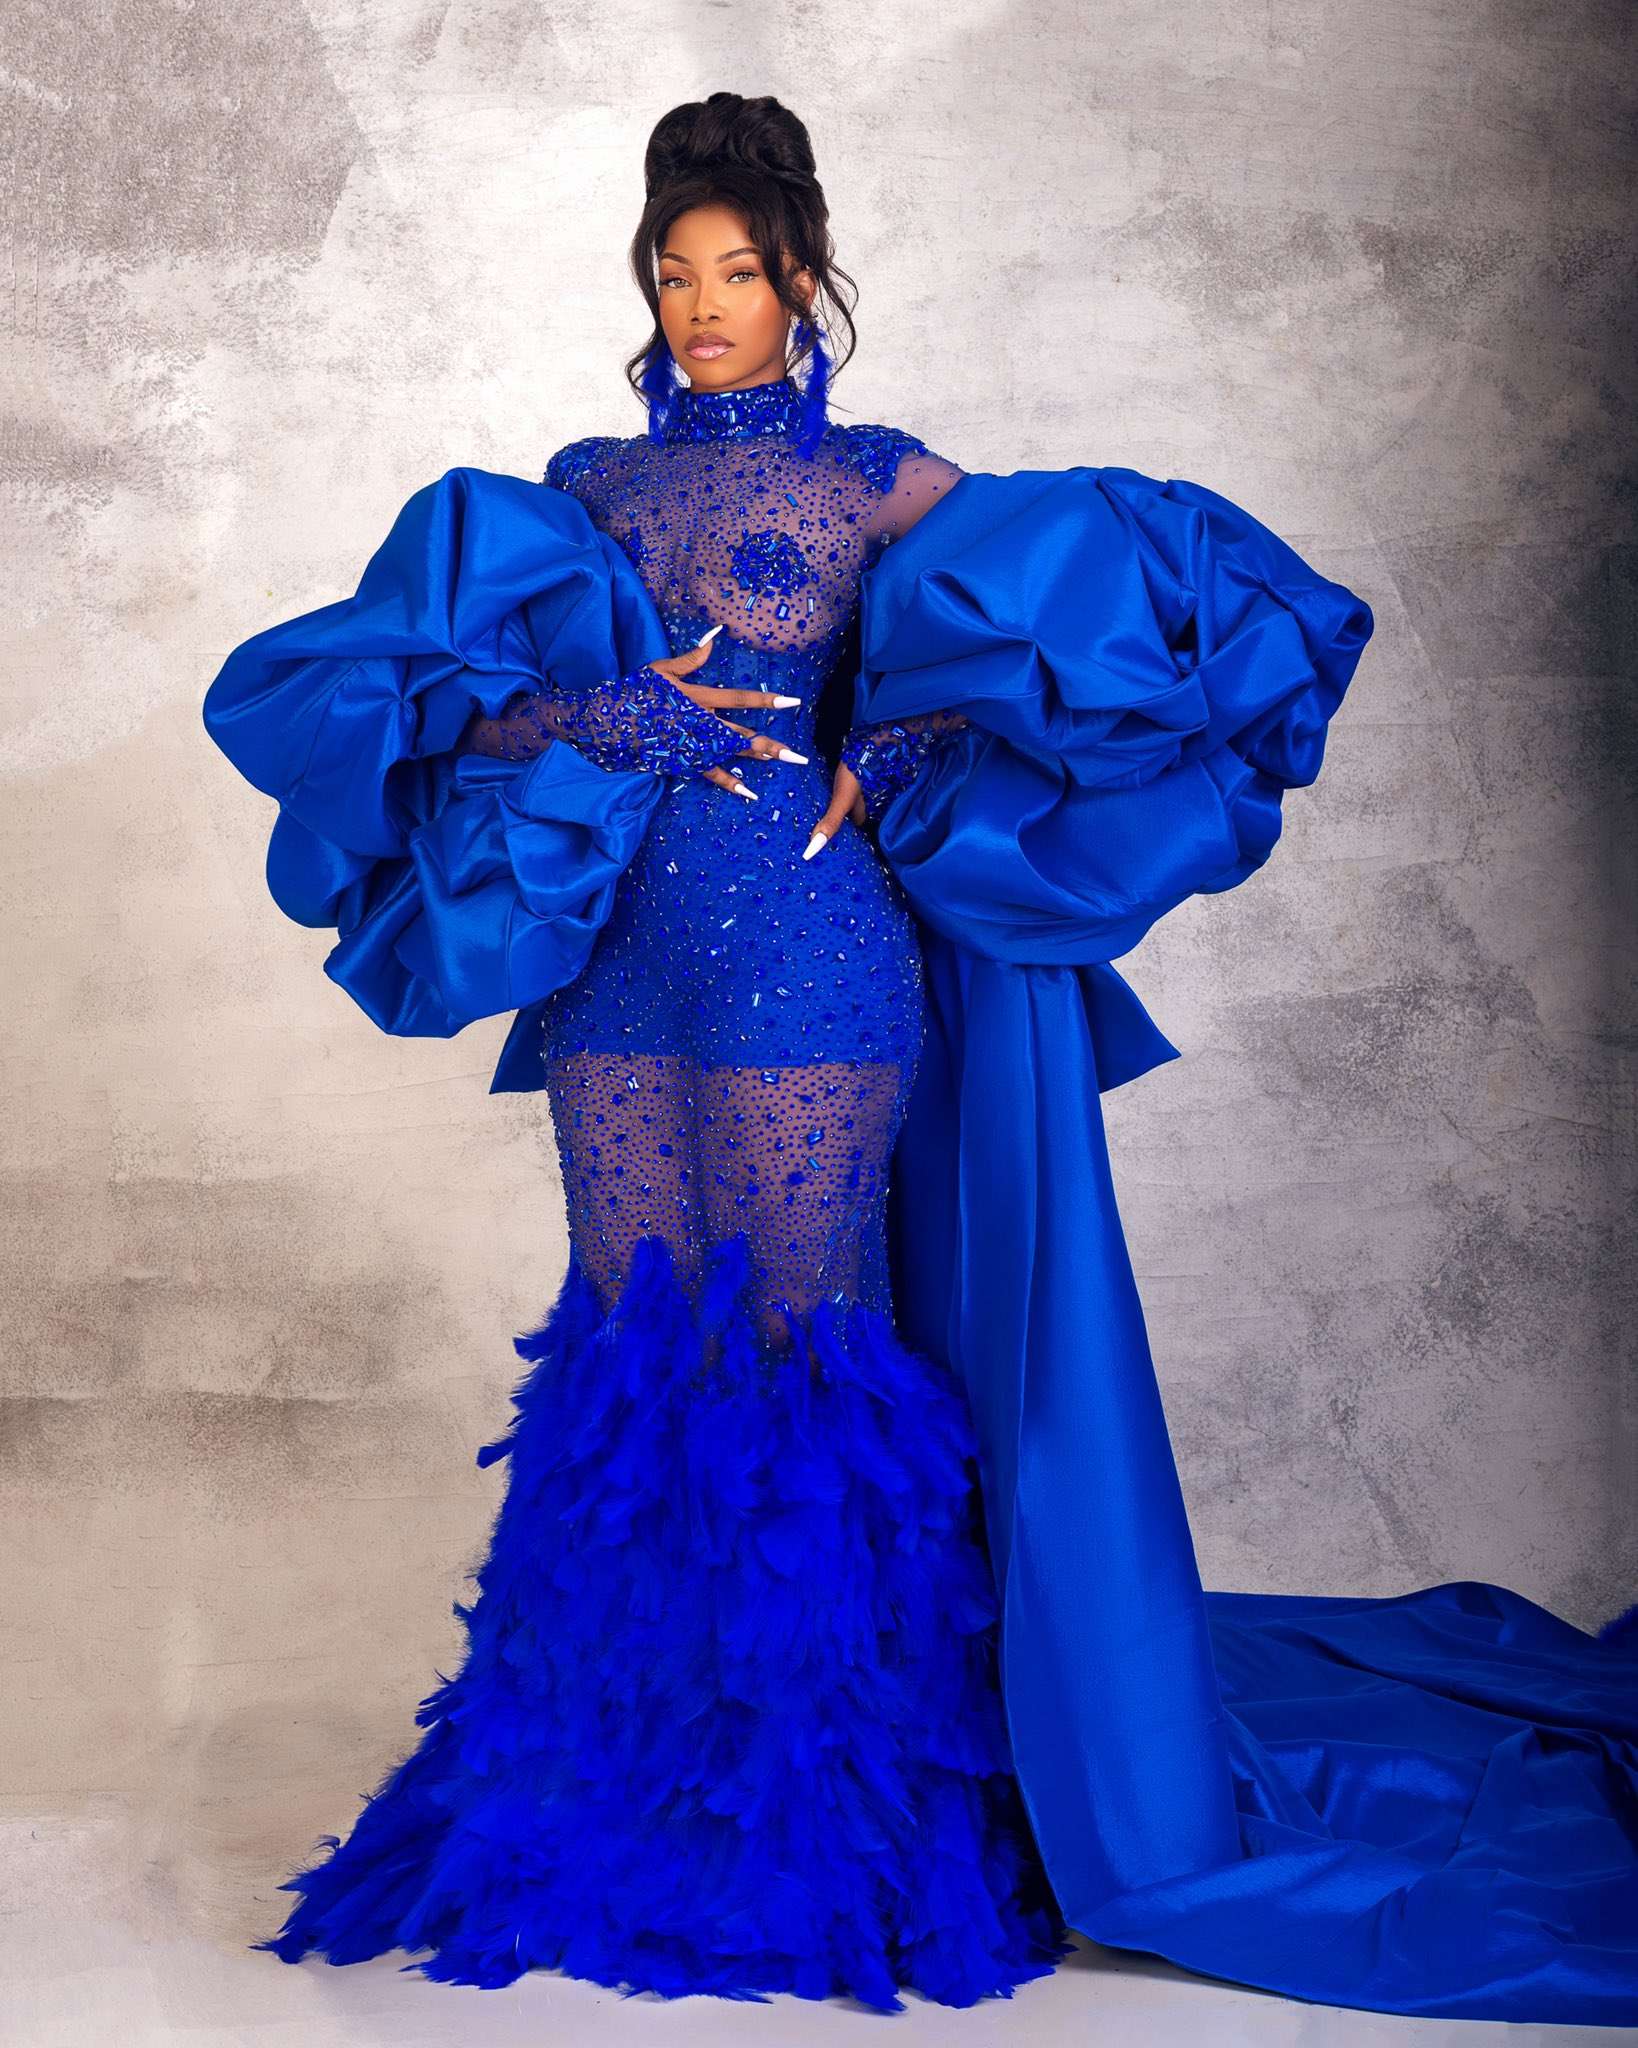 Beautiful tacha shows off her 9.5 million dress to the AMVCA awards in a viral video